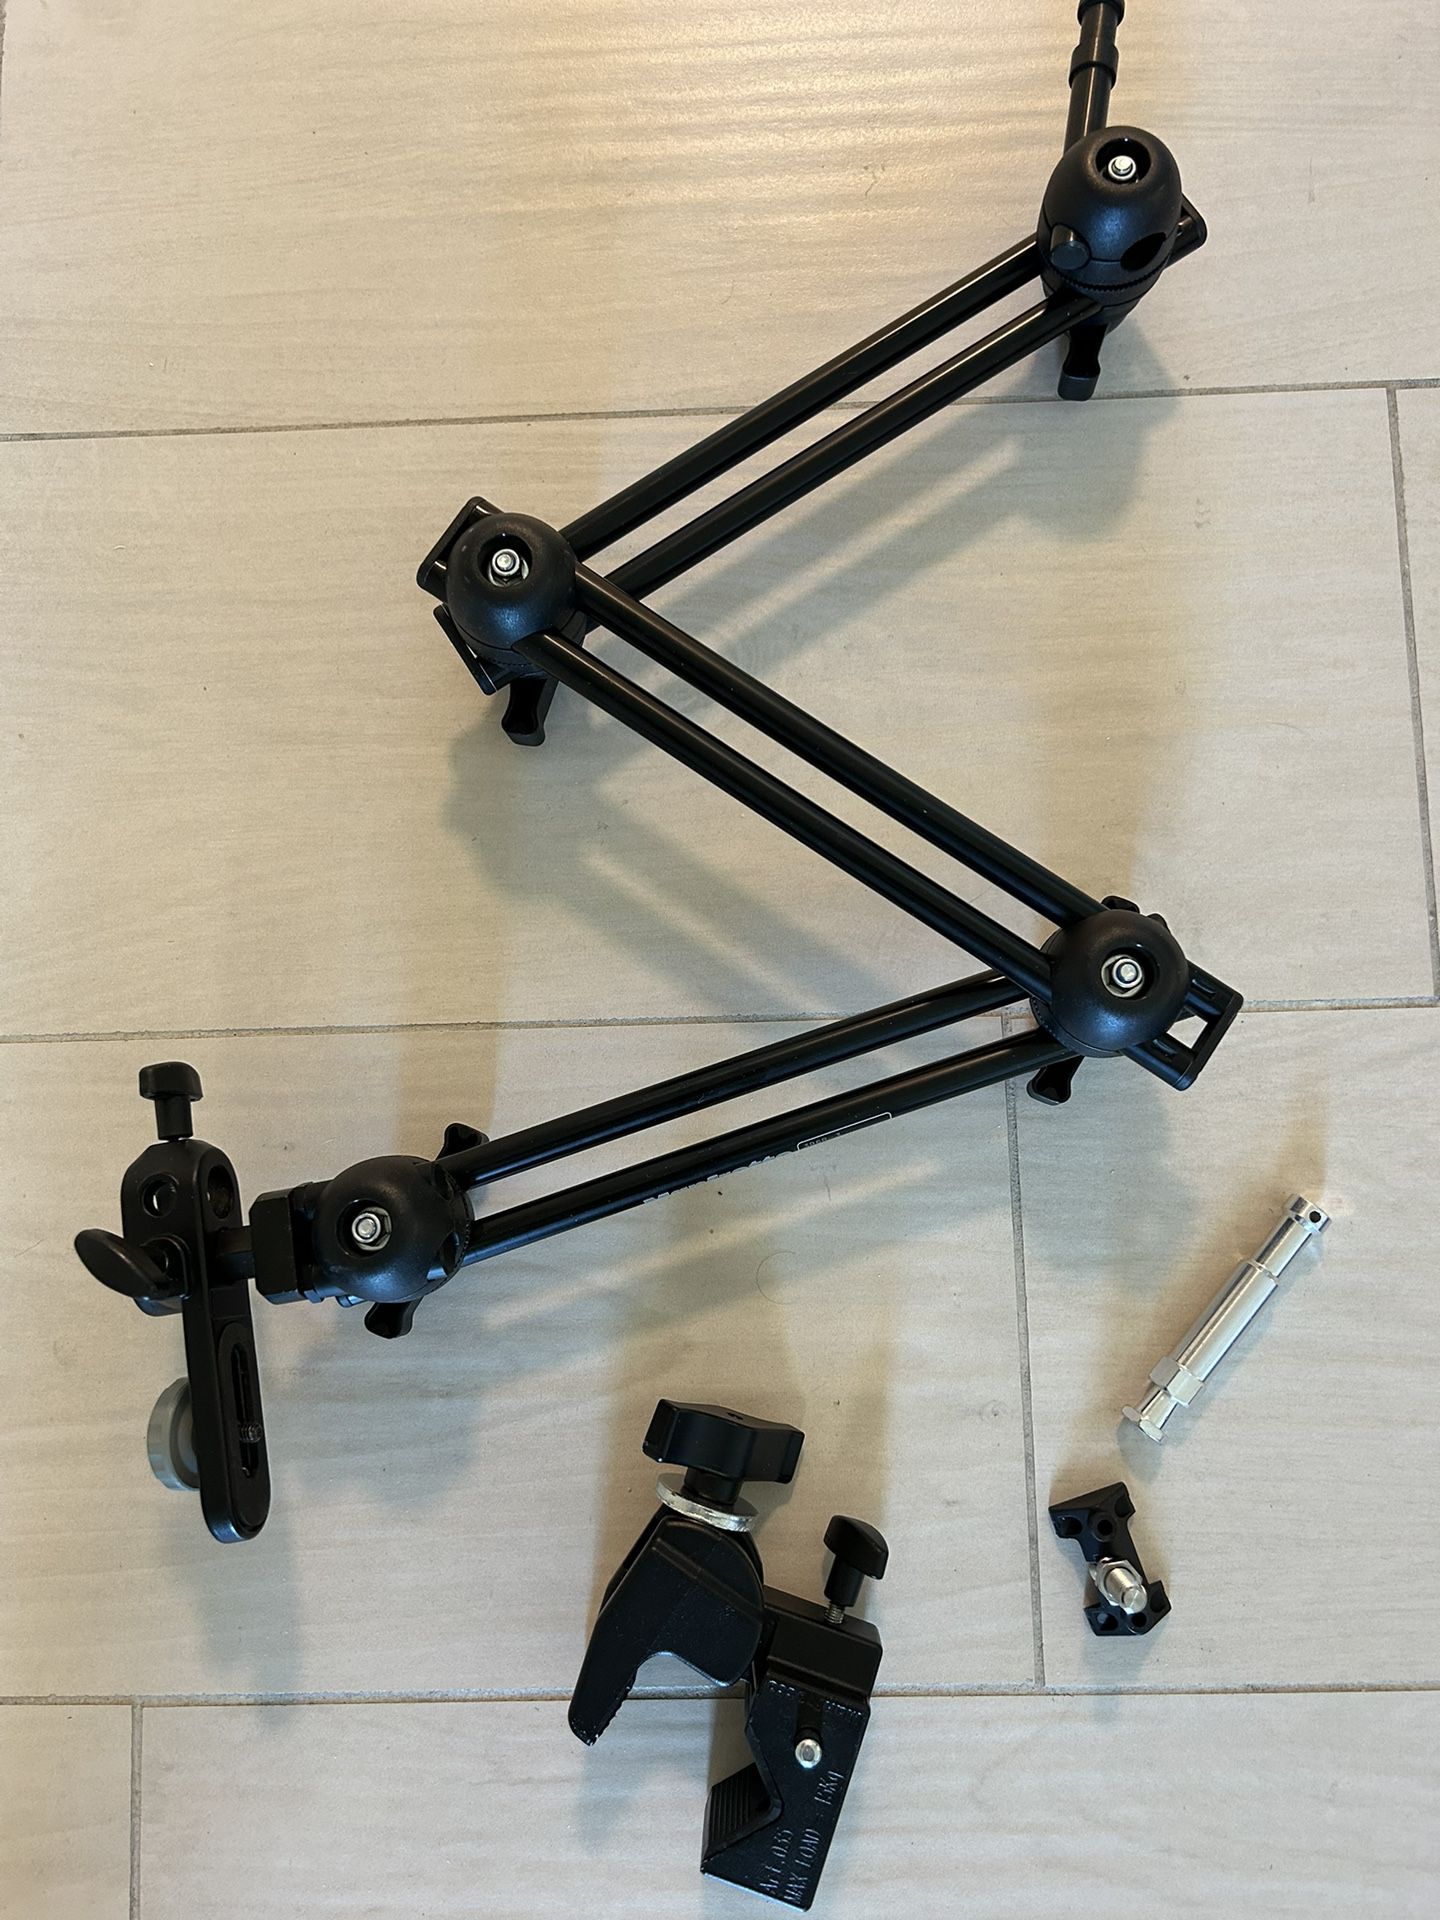 MANFROTTO 396B-3 Section Double Articulated ARM BRACKET Manfrotto C1510 SUPER CLAMP 035 + Avenger E600 PIN + 1 WEDGE